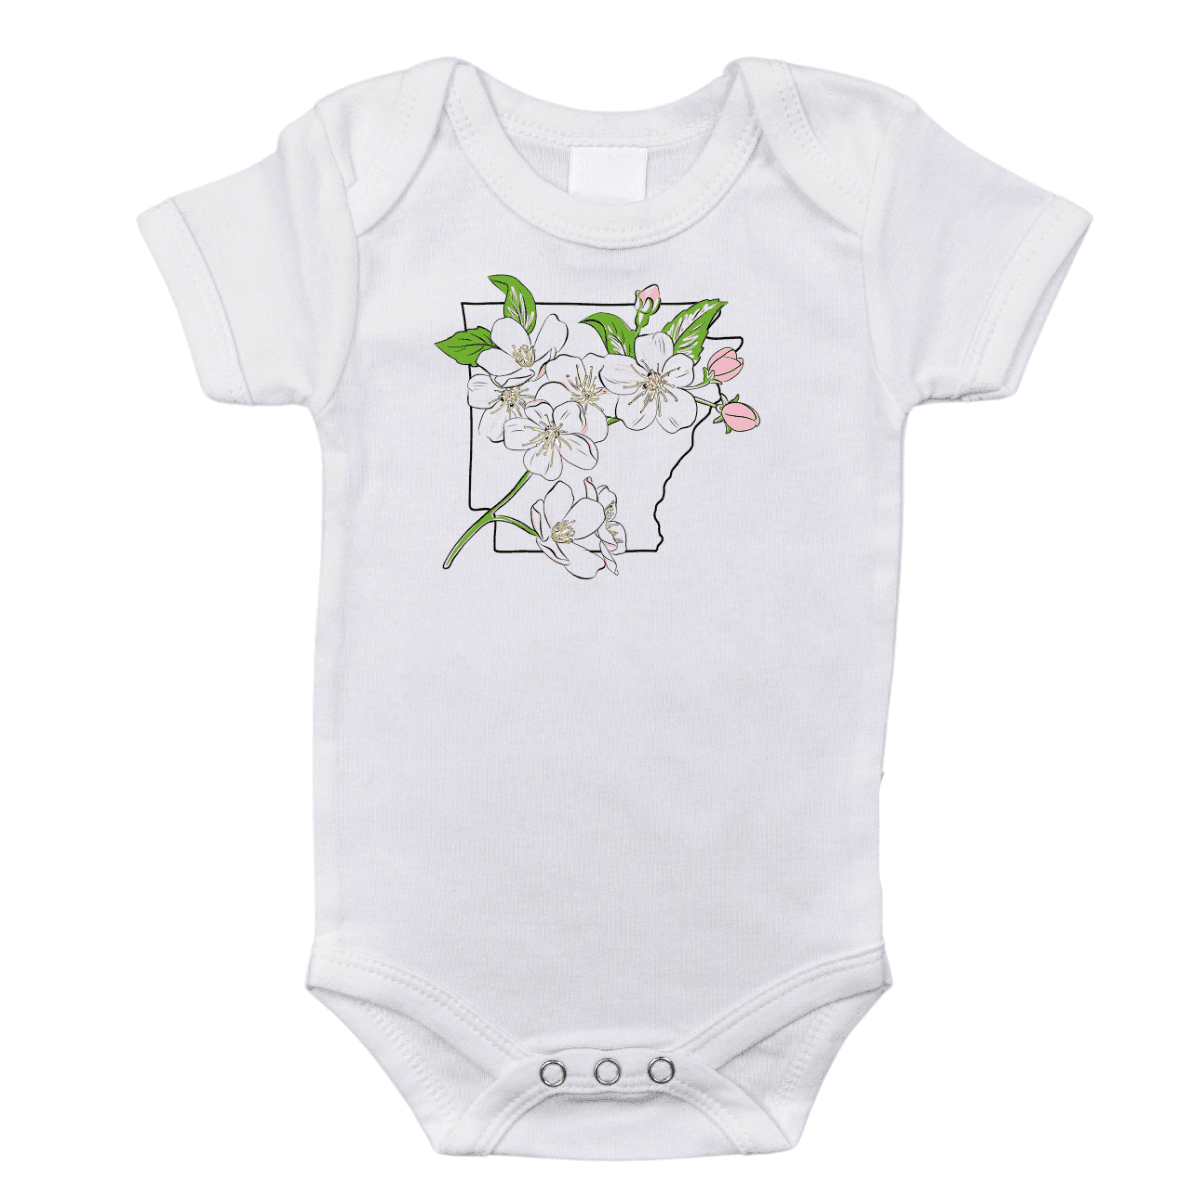 White baby onesie with "Arkansas Apple Blossom" text and pink apple blossom graphic, laid flat on a white background.